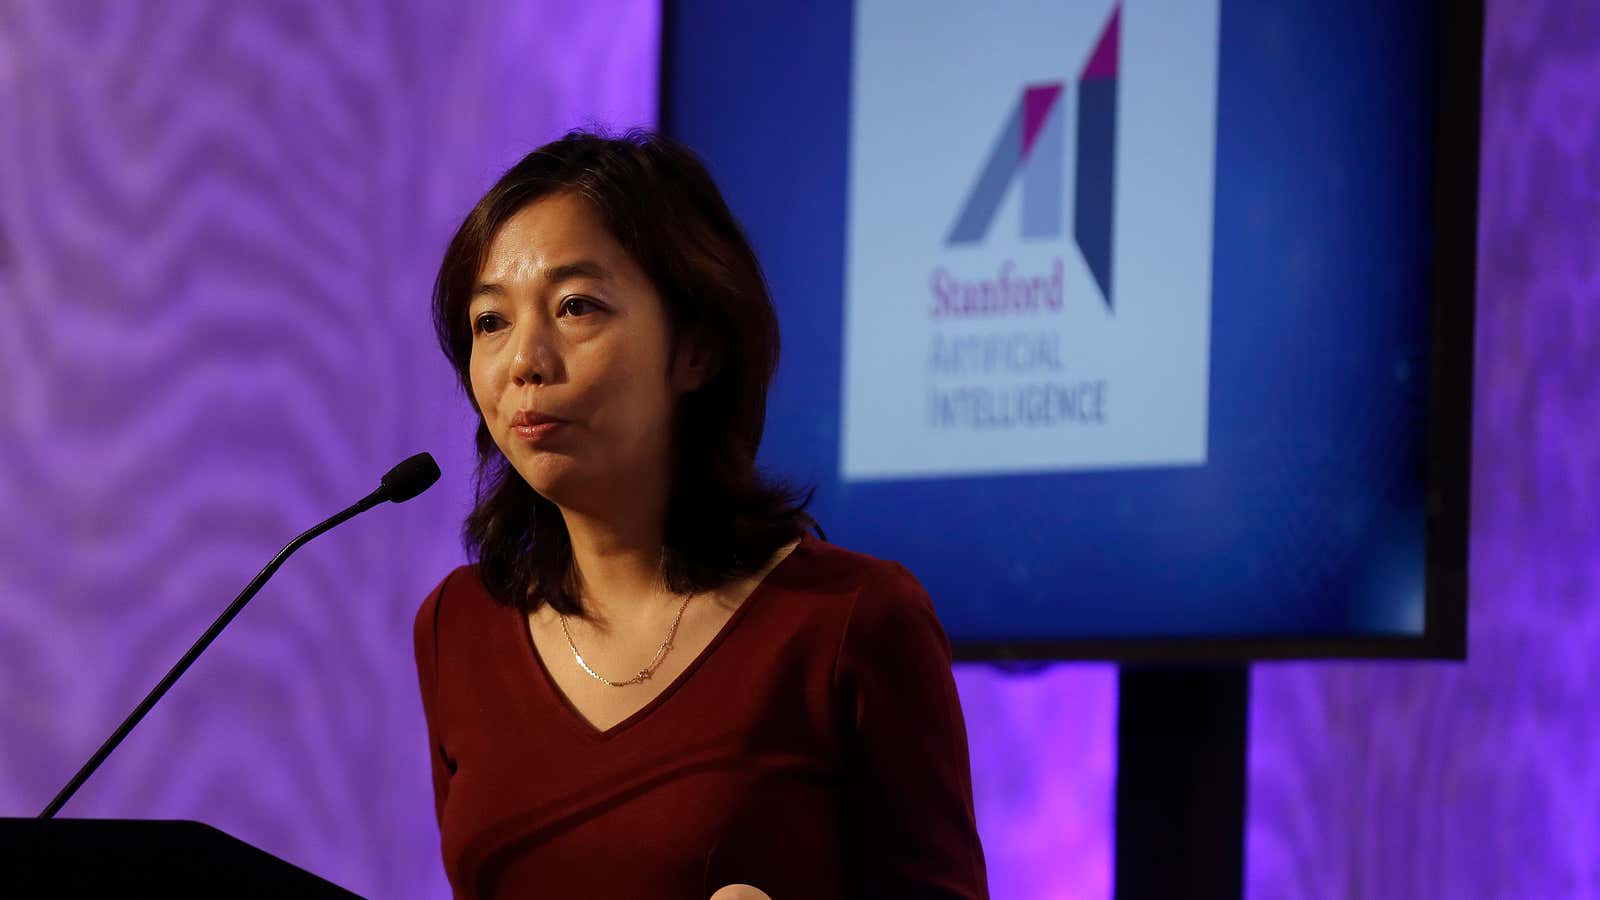 Stanford professor and Google Cloud chief scientist Fei-Fei Li changed everything.